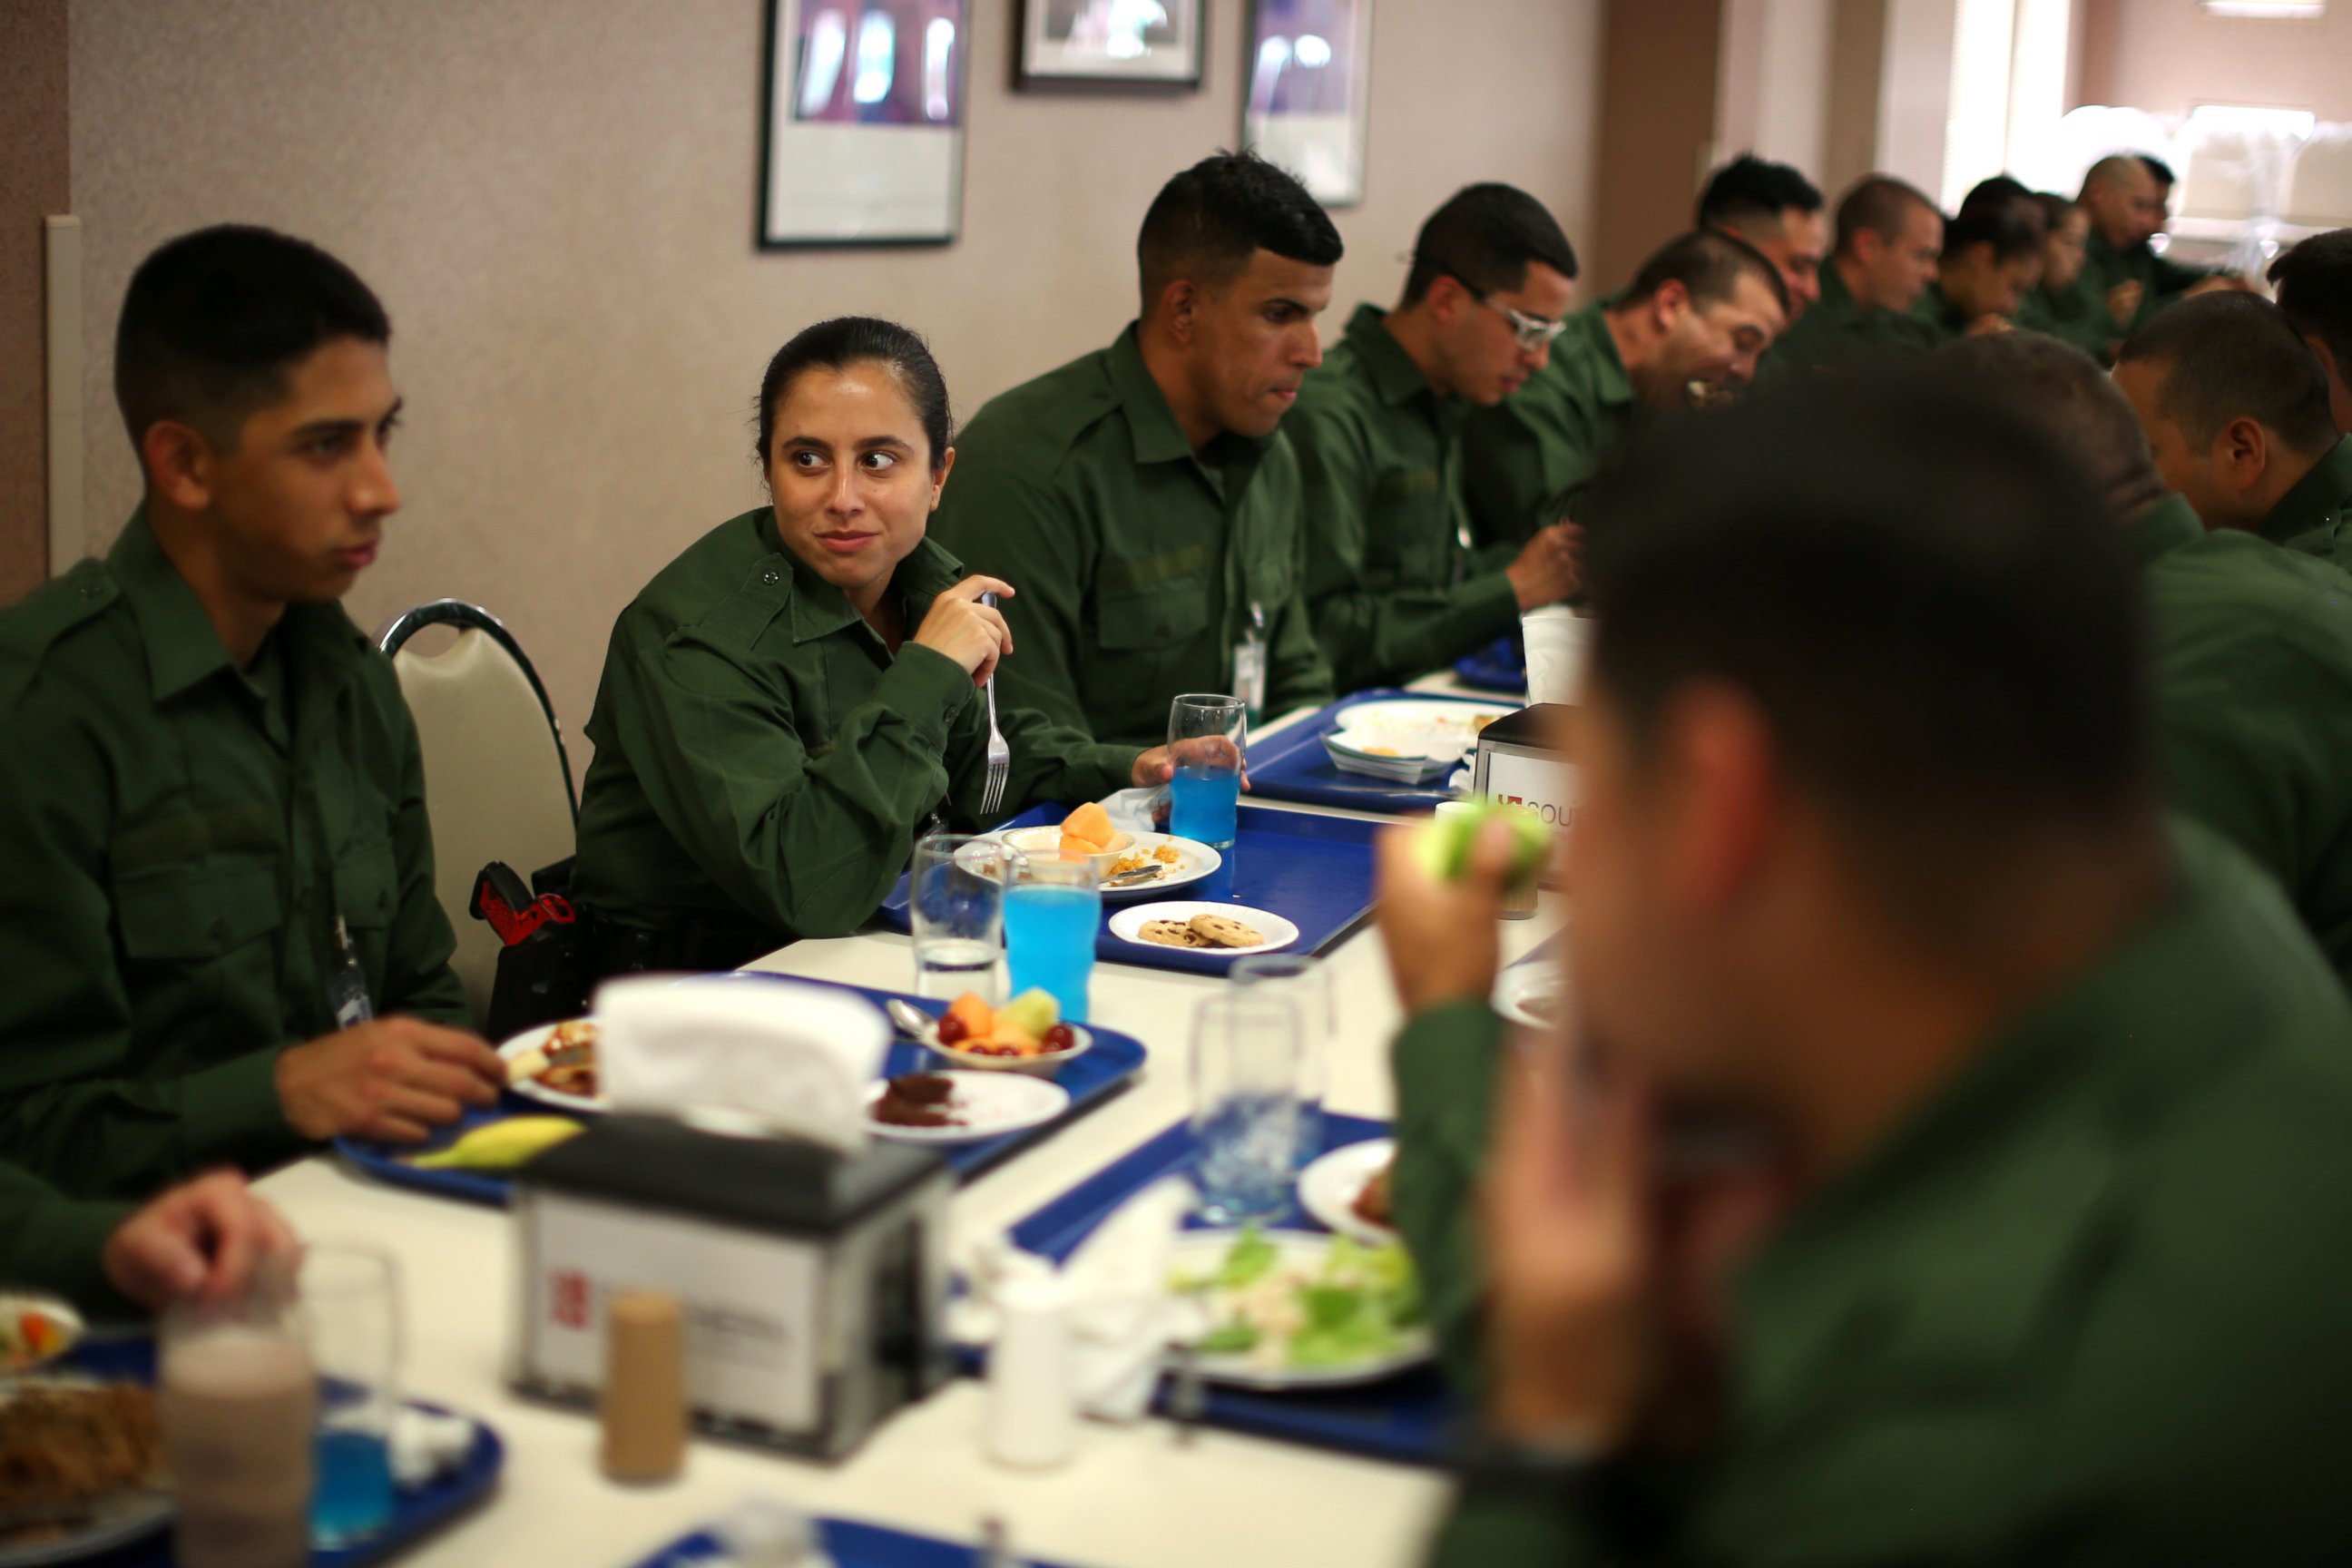 PHOTO: Border patrol trainee Stevany Shakare eats lunch with other trainees at the United States Border Patrol Academy in Artesia, New Mexico, June 8, 2017.